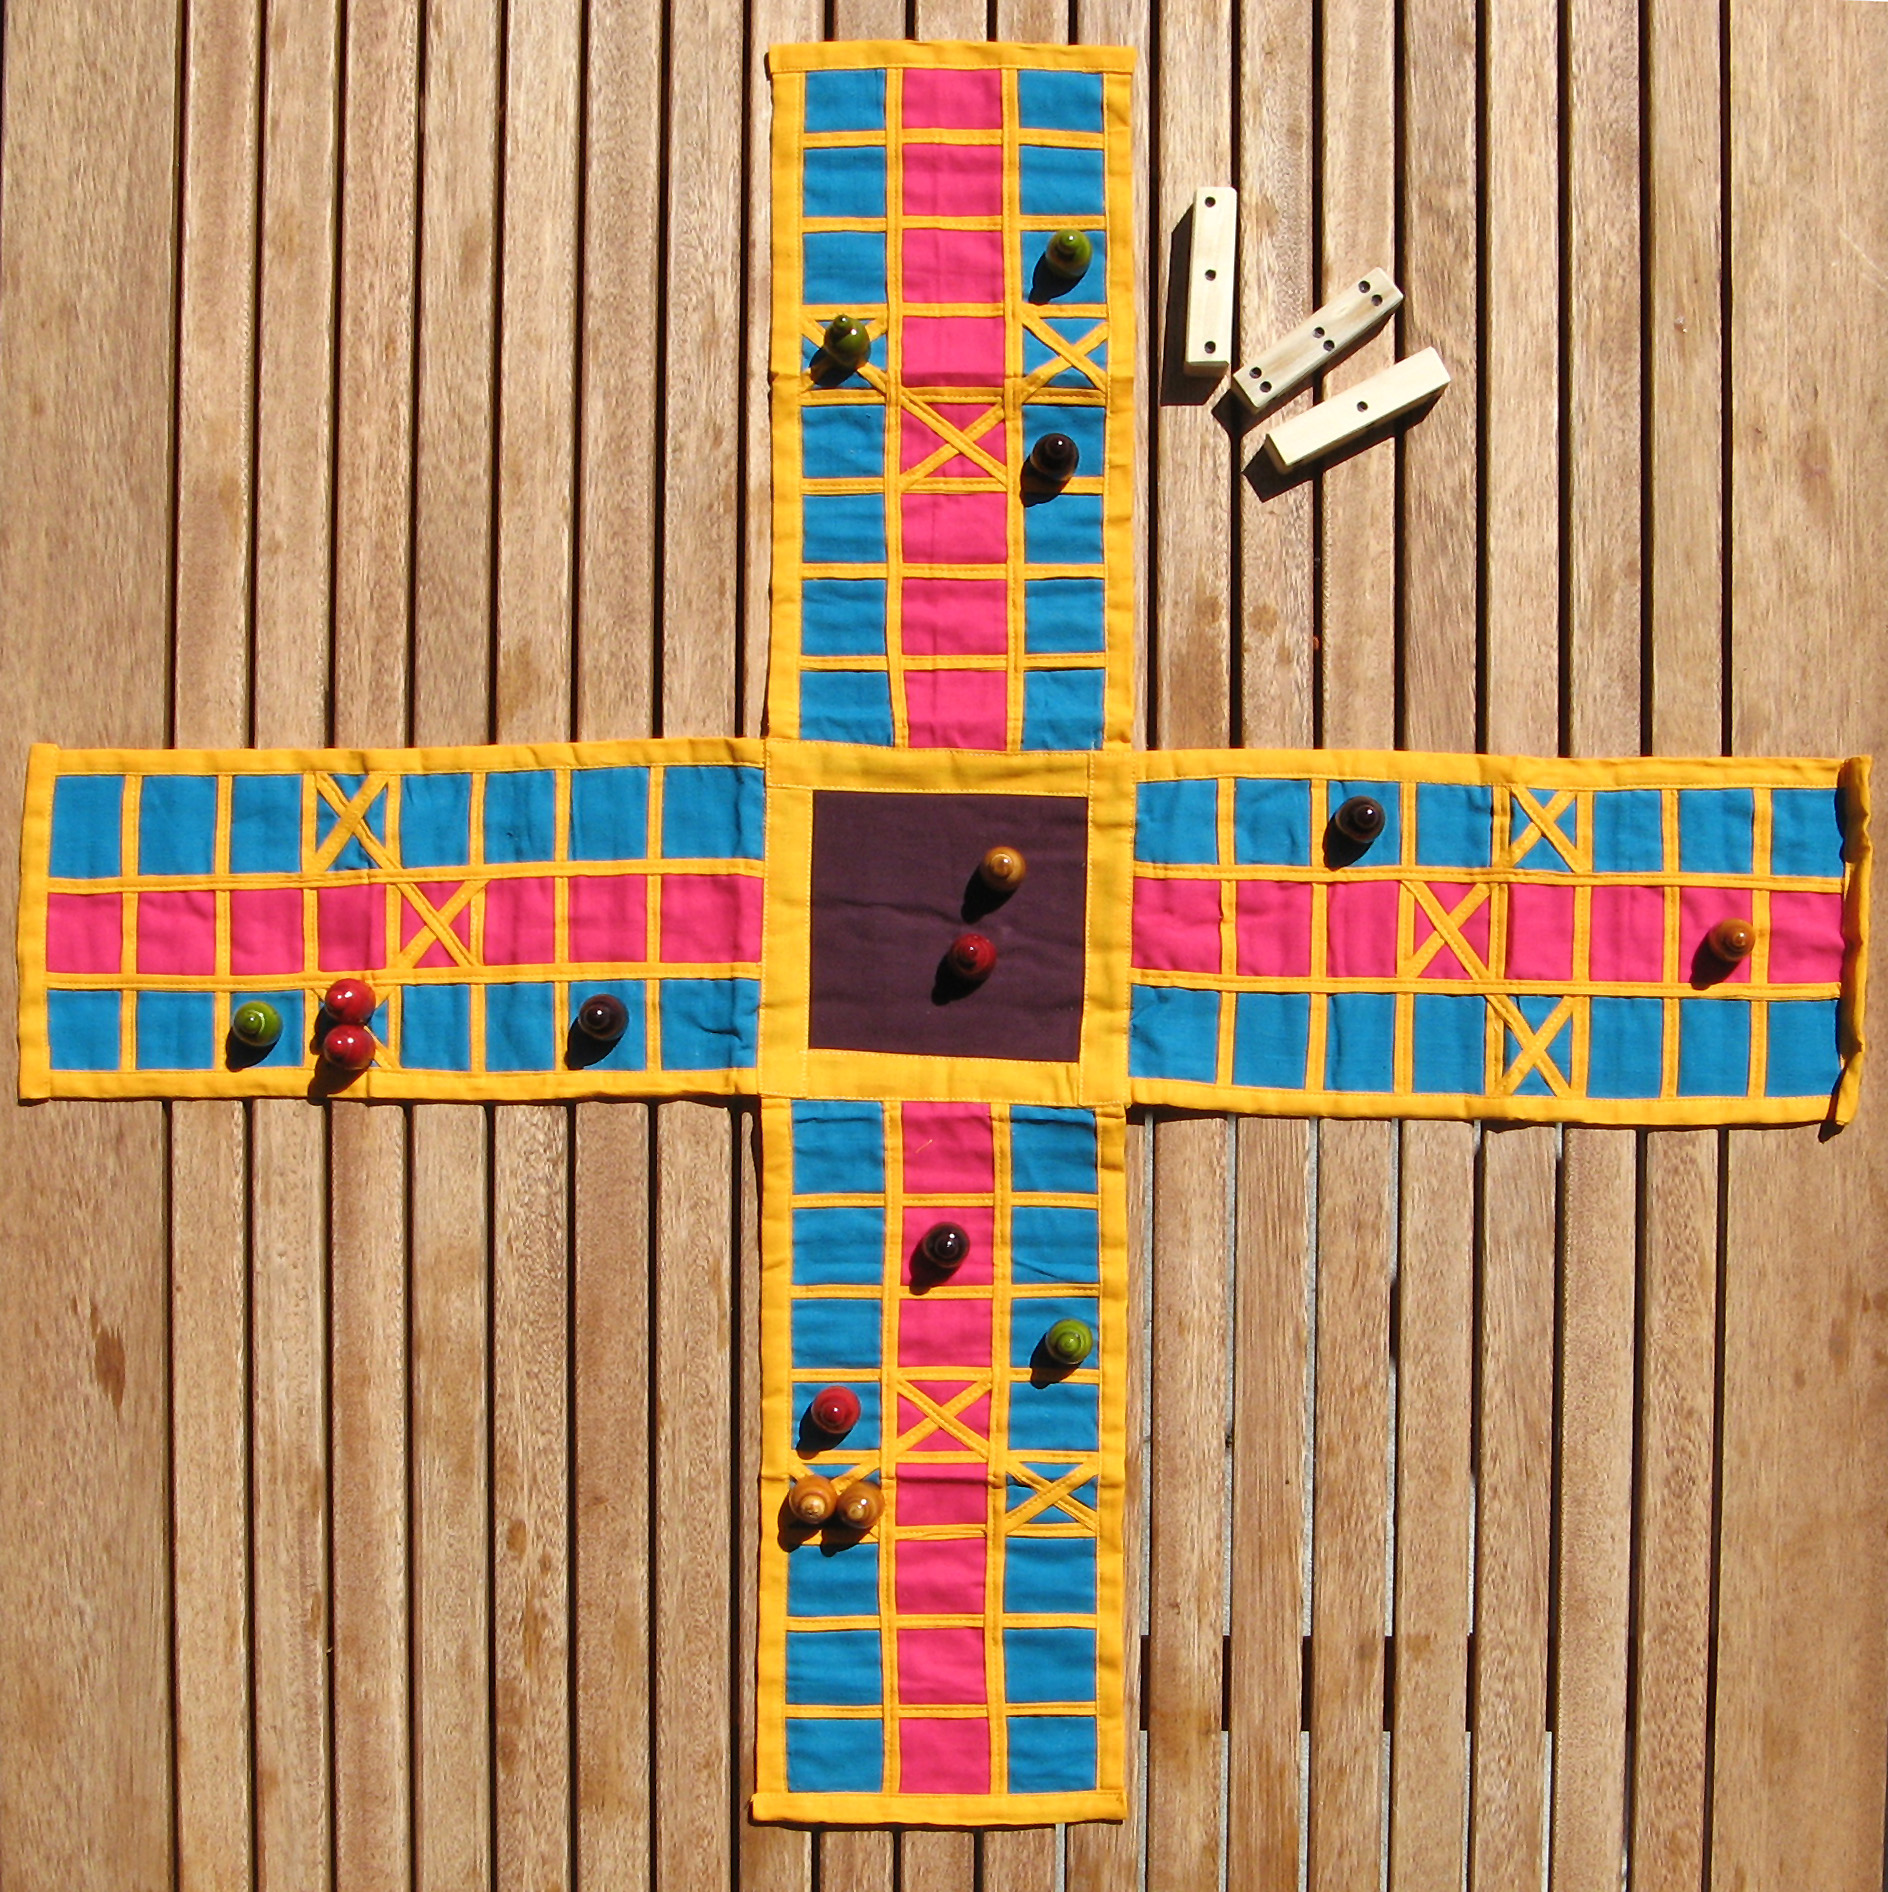 ludo rules passing players